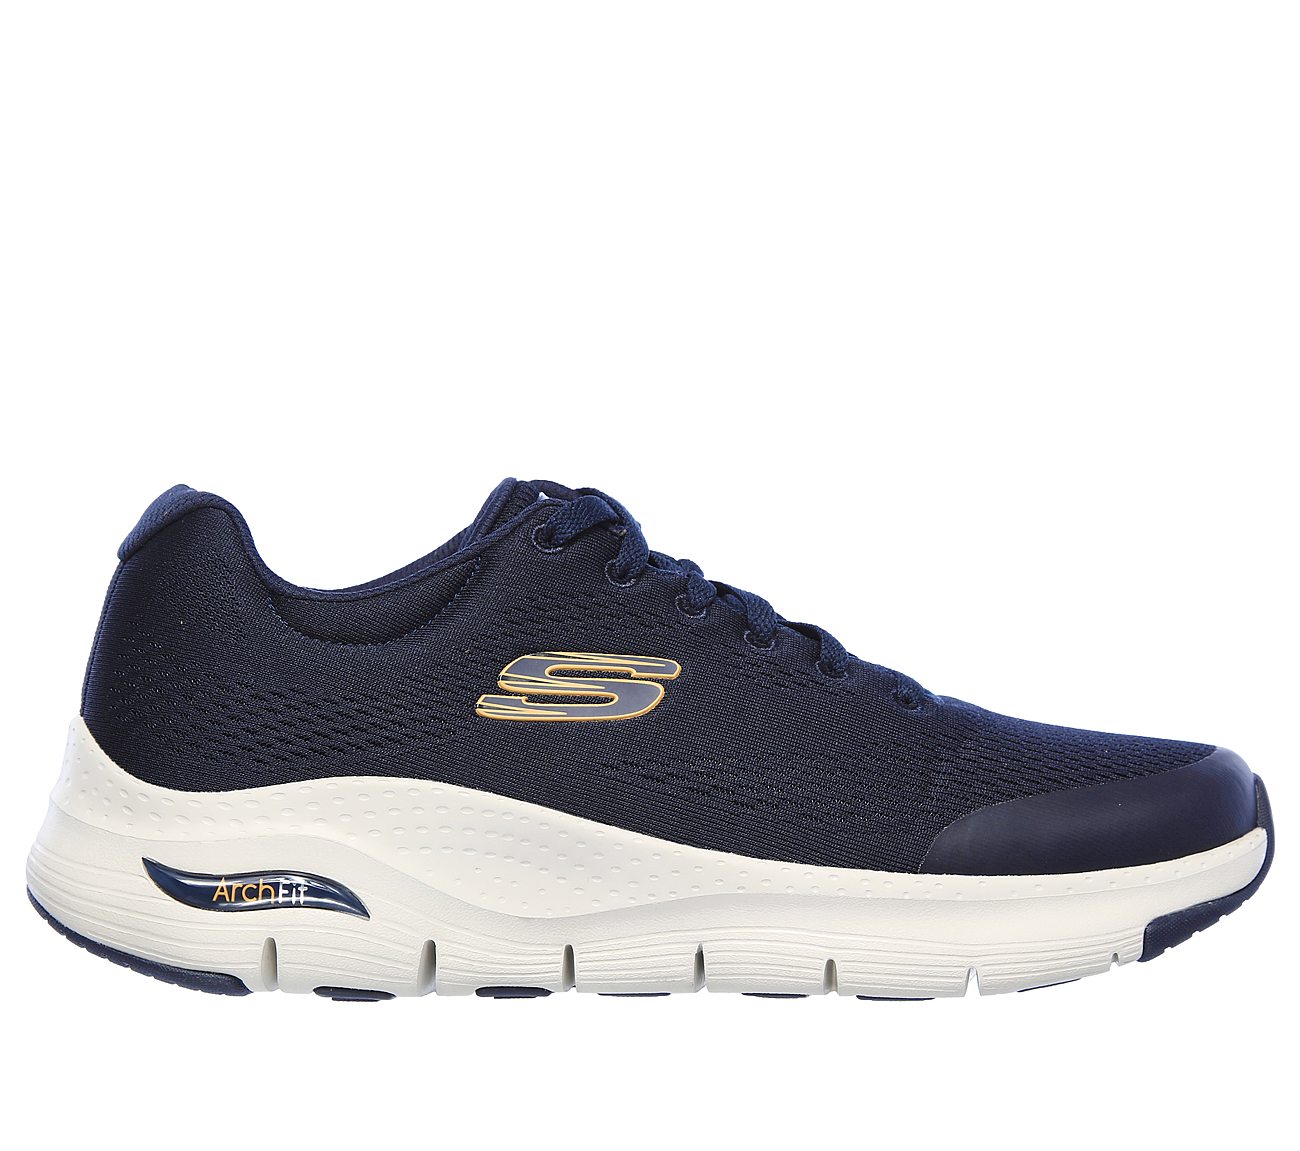 skechers arch support sneakers